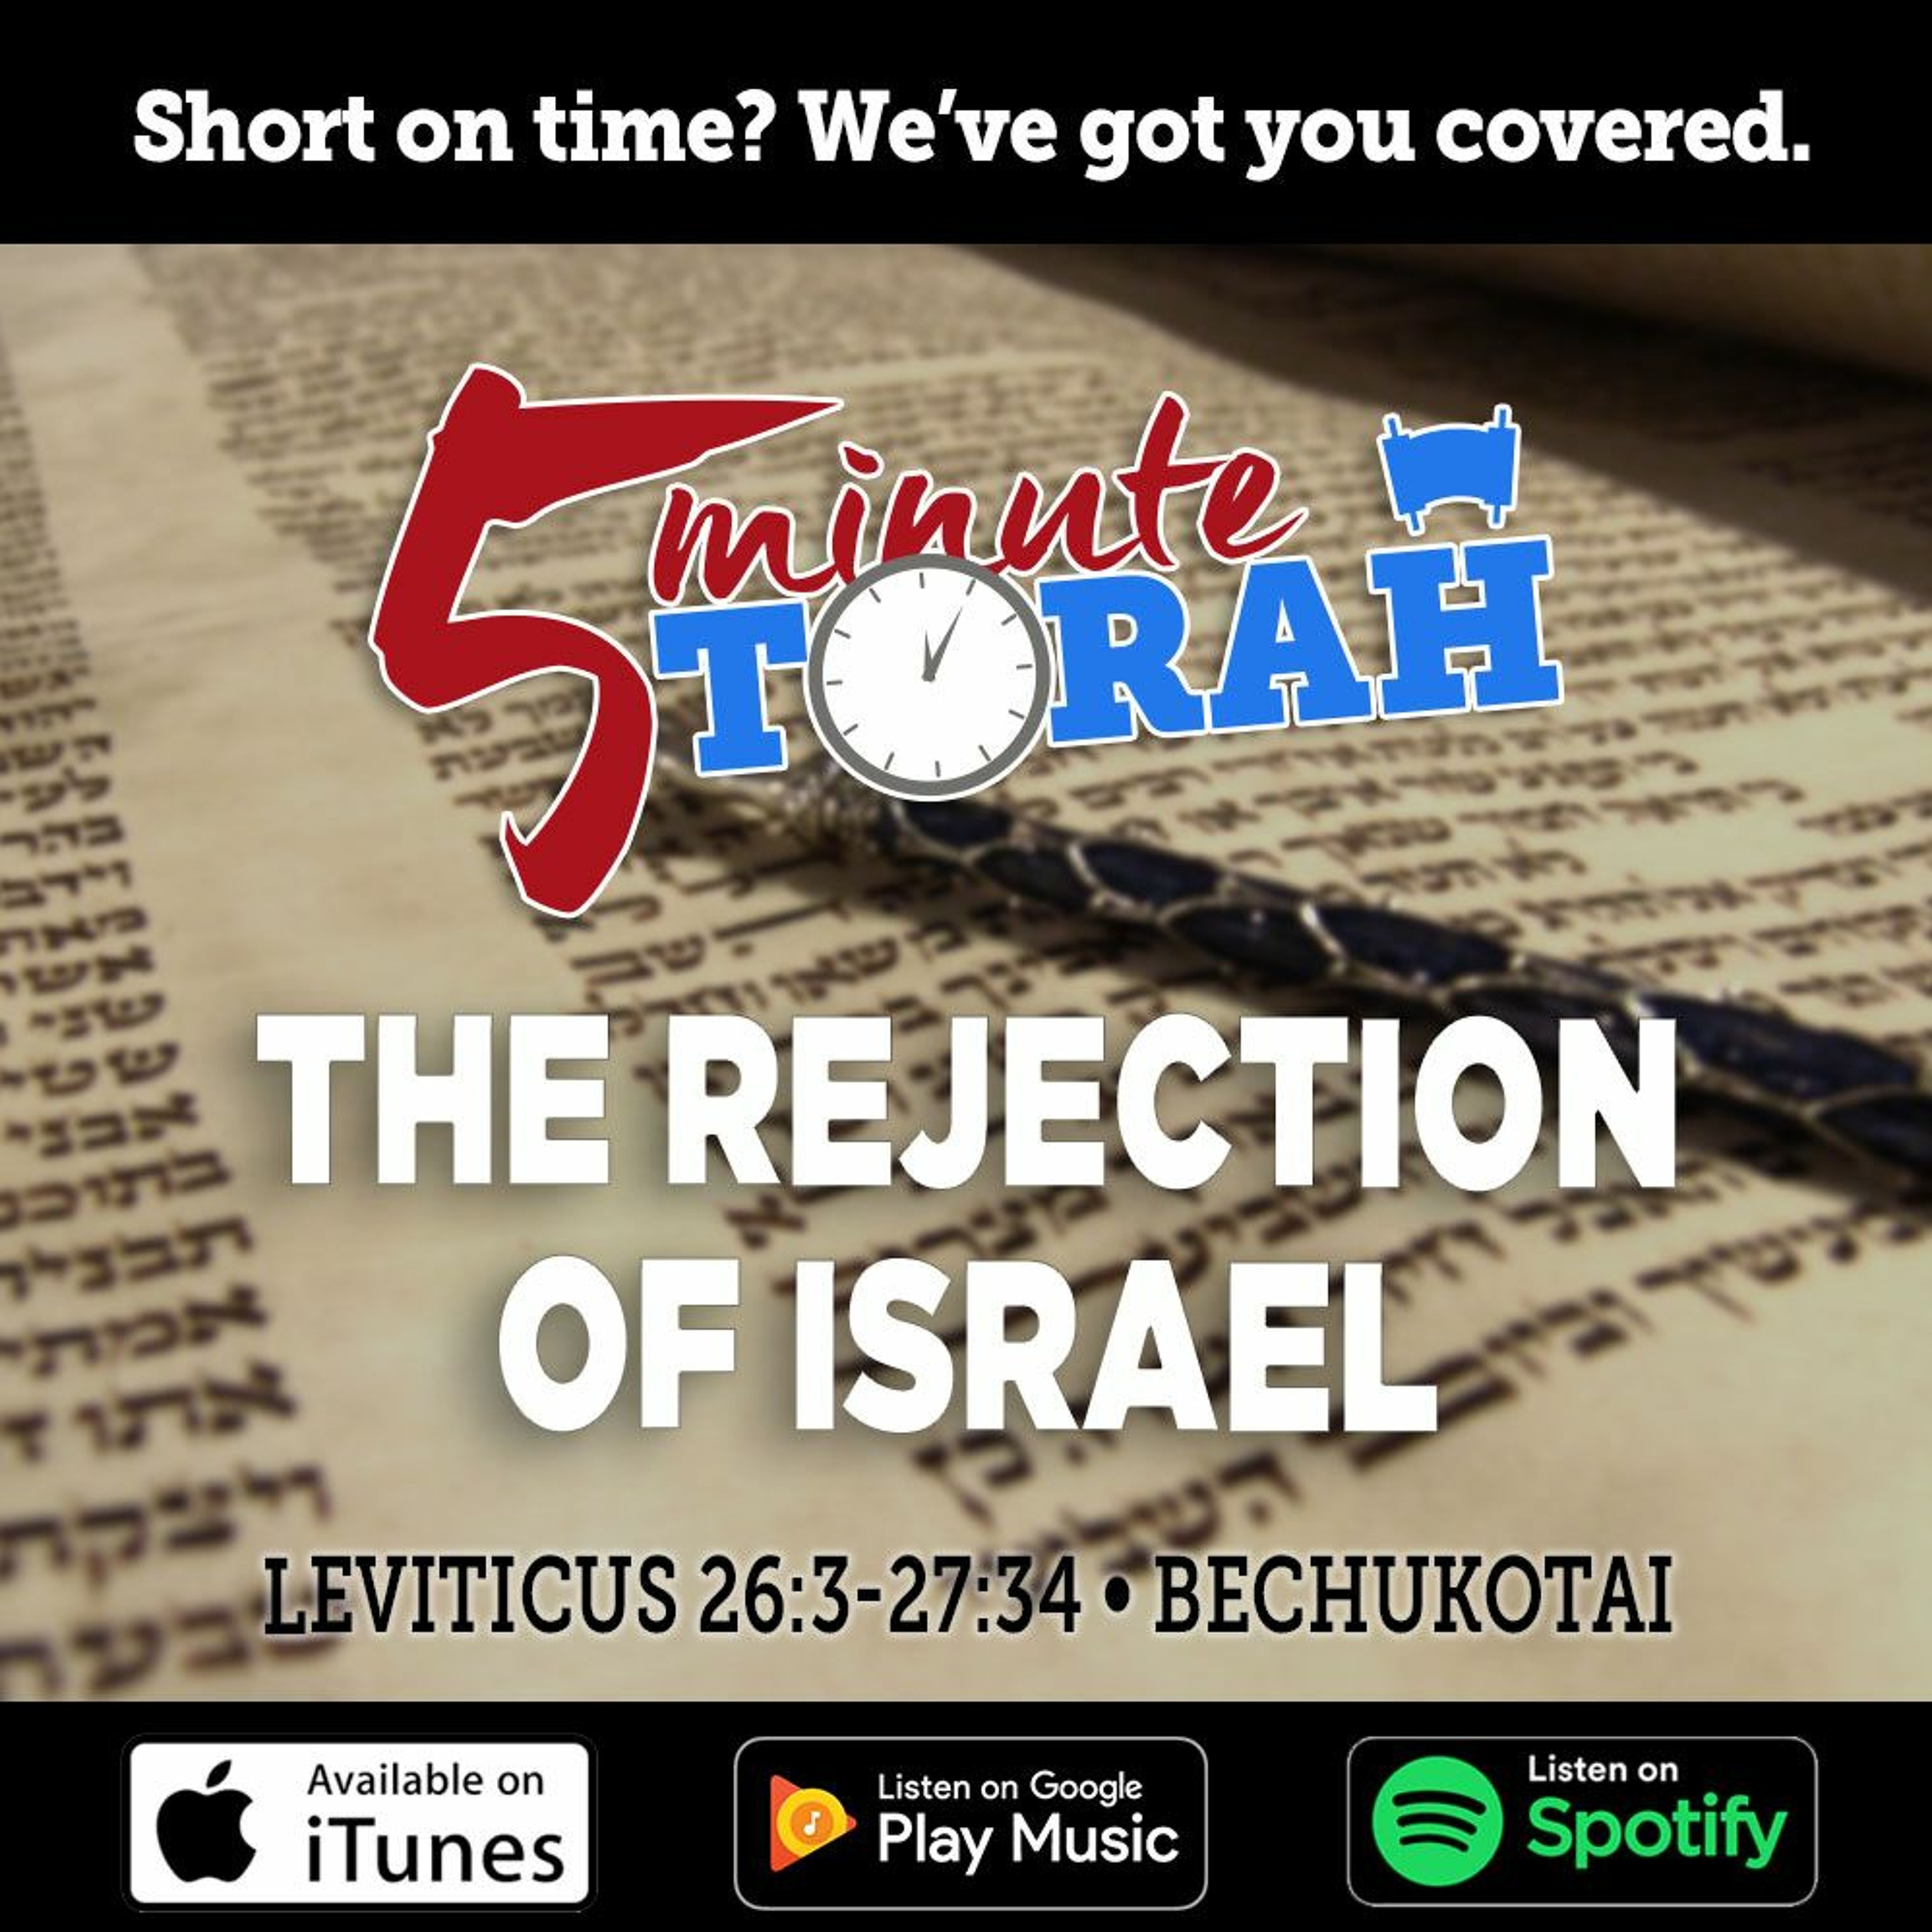 Bechukotai - The Rejection of Israel